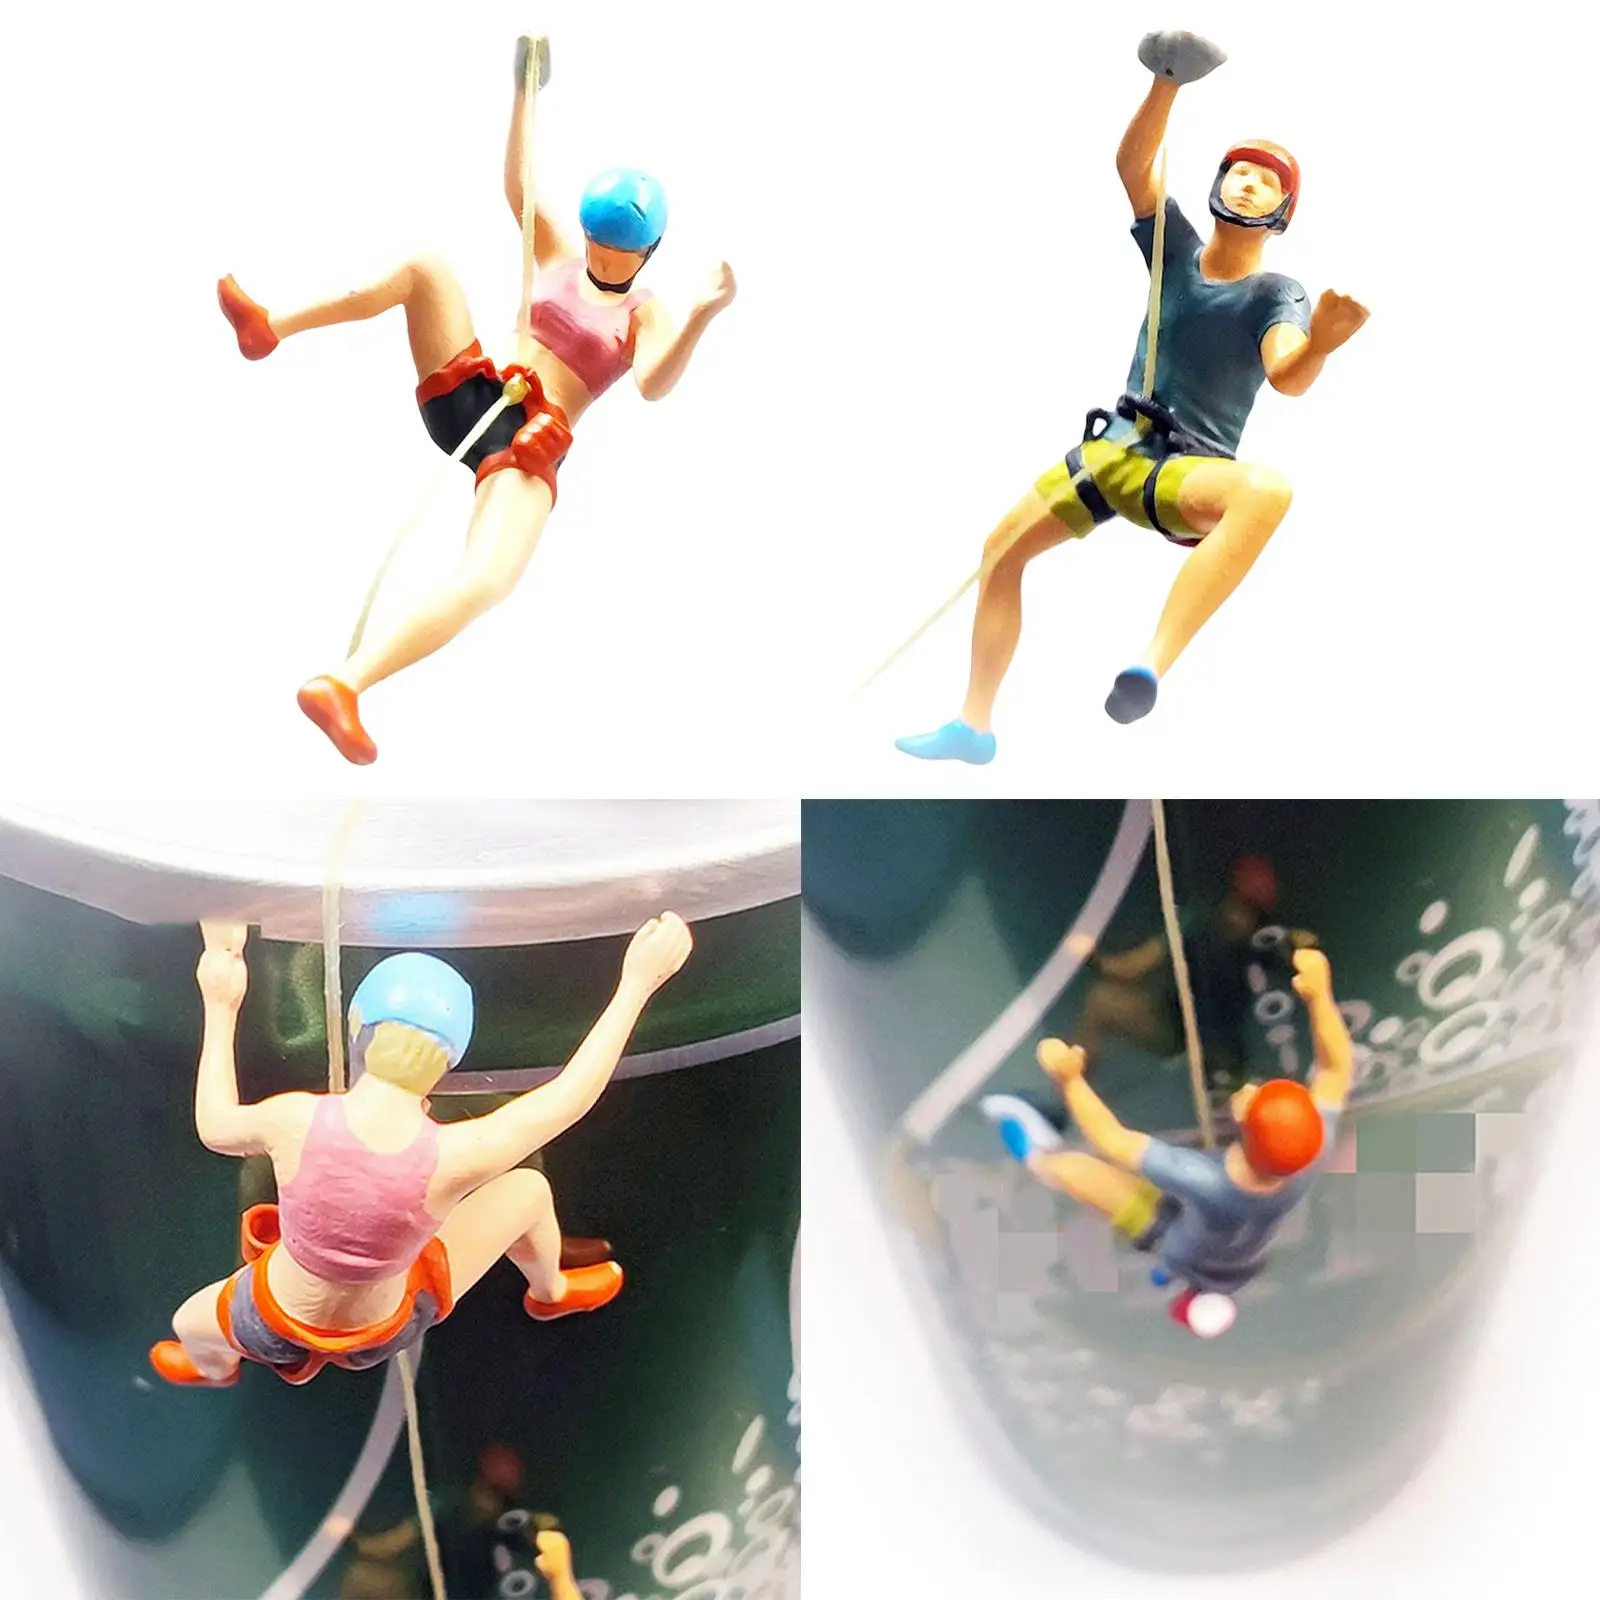 Painted Figures Tiny People Toys Simulation Miniature Toy Climbing People